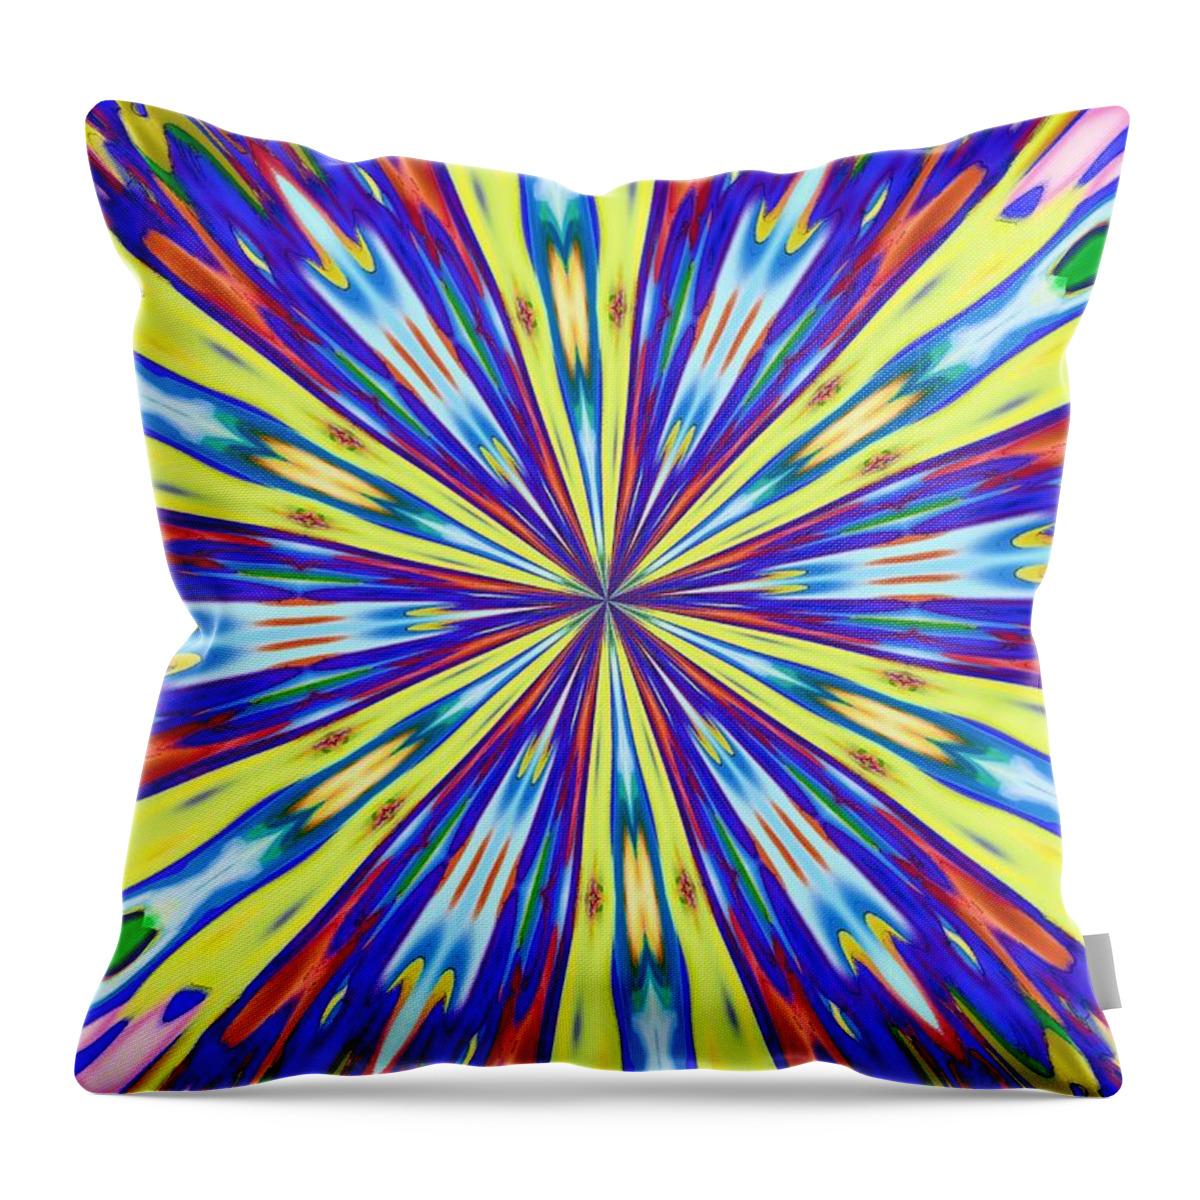 Rainbow Throw Pillow featuring the digital art Rainbow In Space by Alec Drake